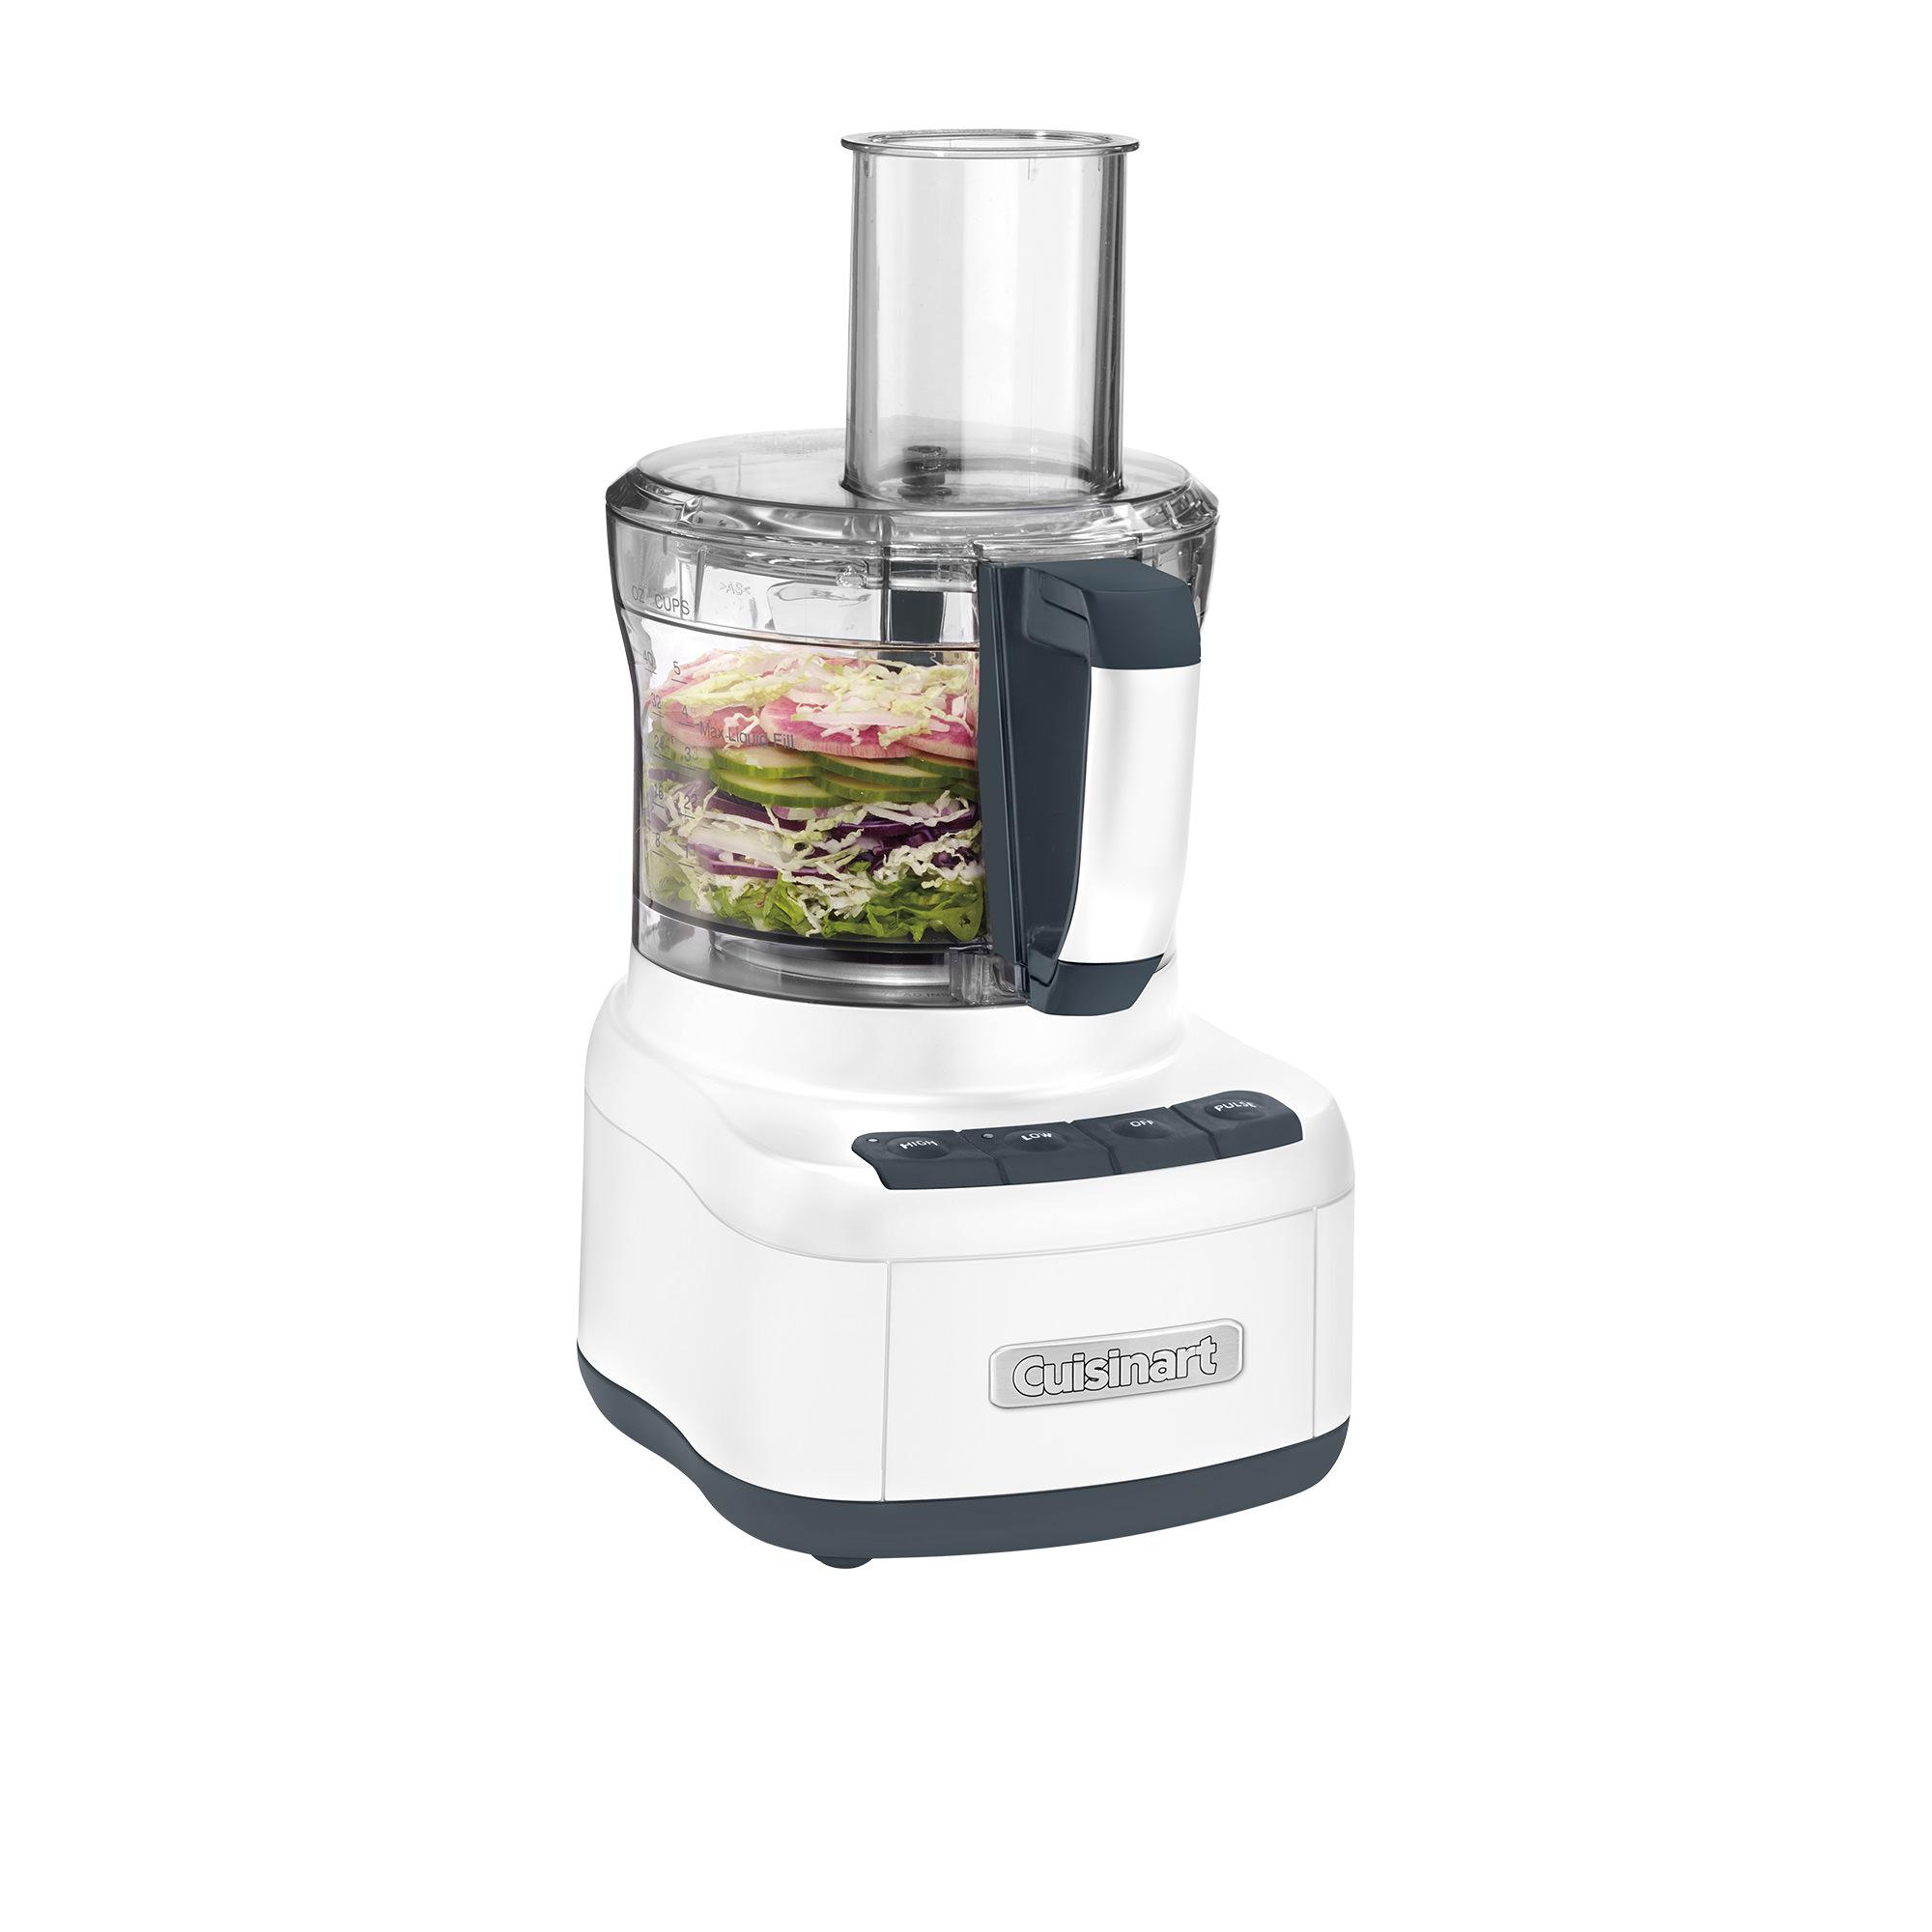 Cuisinart Food Processor 8 Cup White Image 3